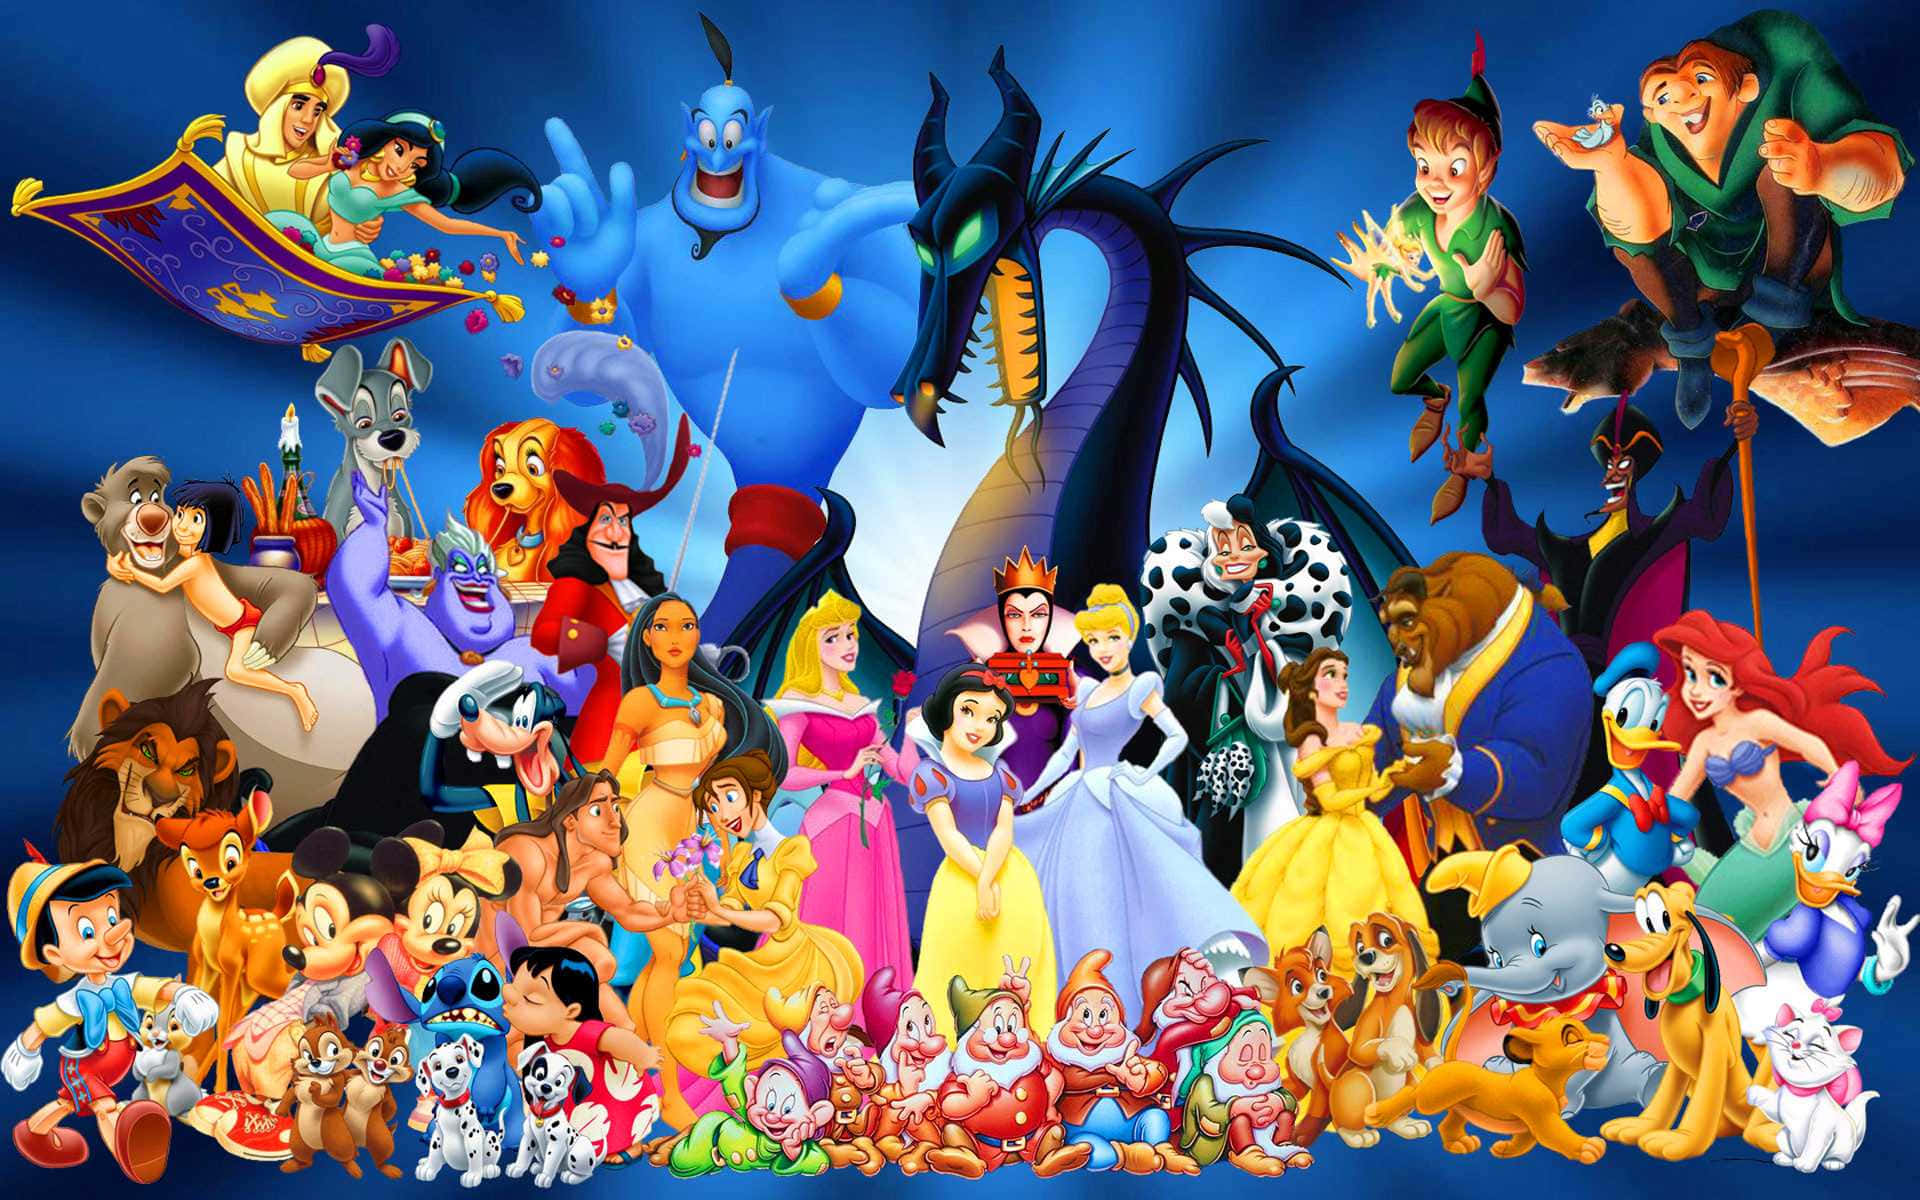 Uniting Cartoon Heroes from Popular Shows Wallpaper